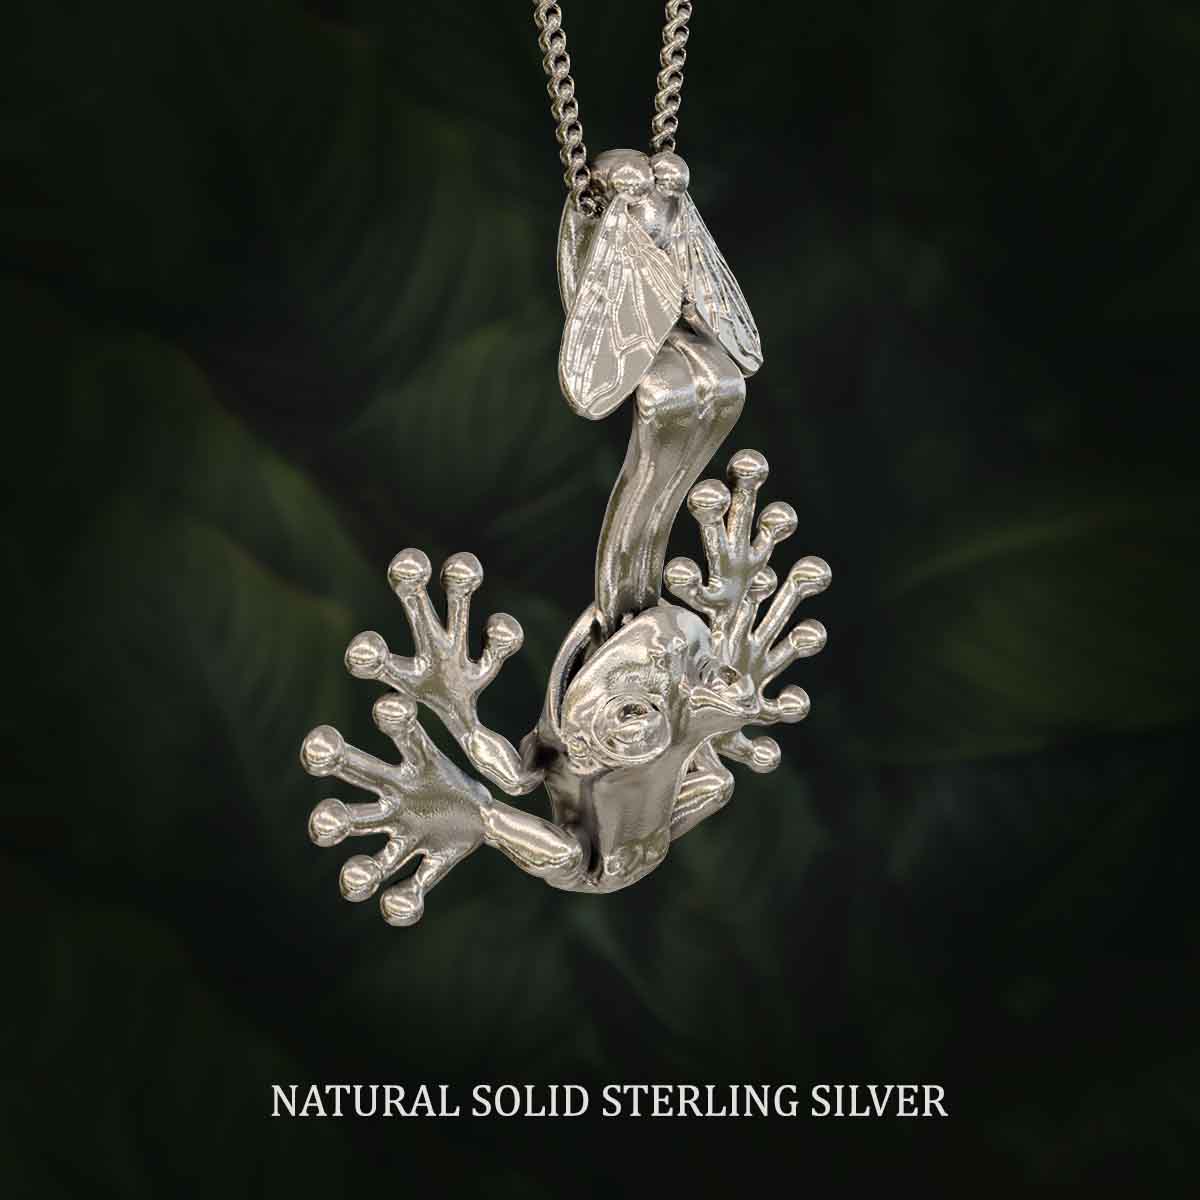     Natural-Satin-Polish-Solid-Sterling-Silver-Frog-Catching-Fly-With-Tongue-Pendant-Jewelry-For-Necklace